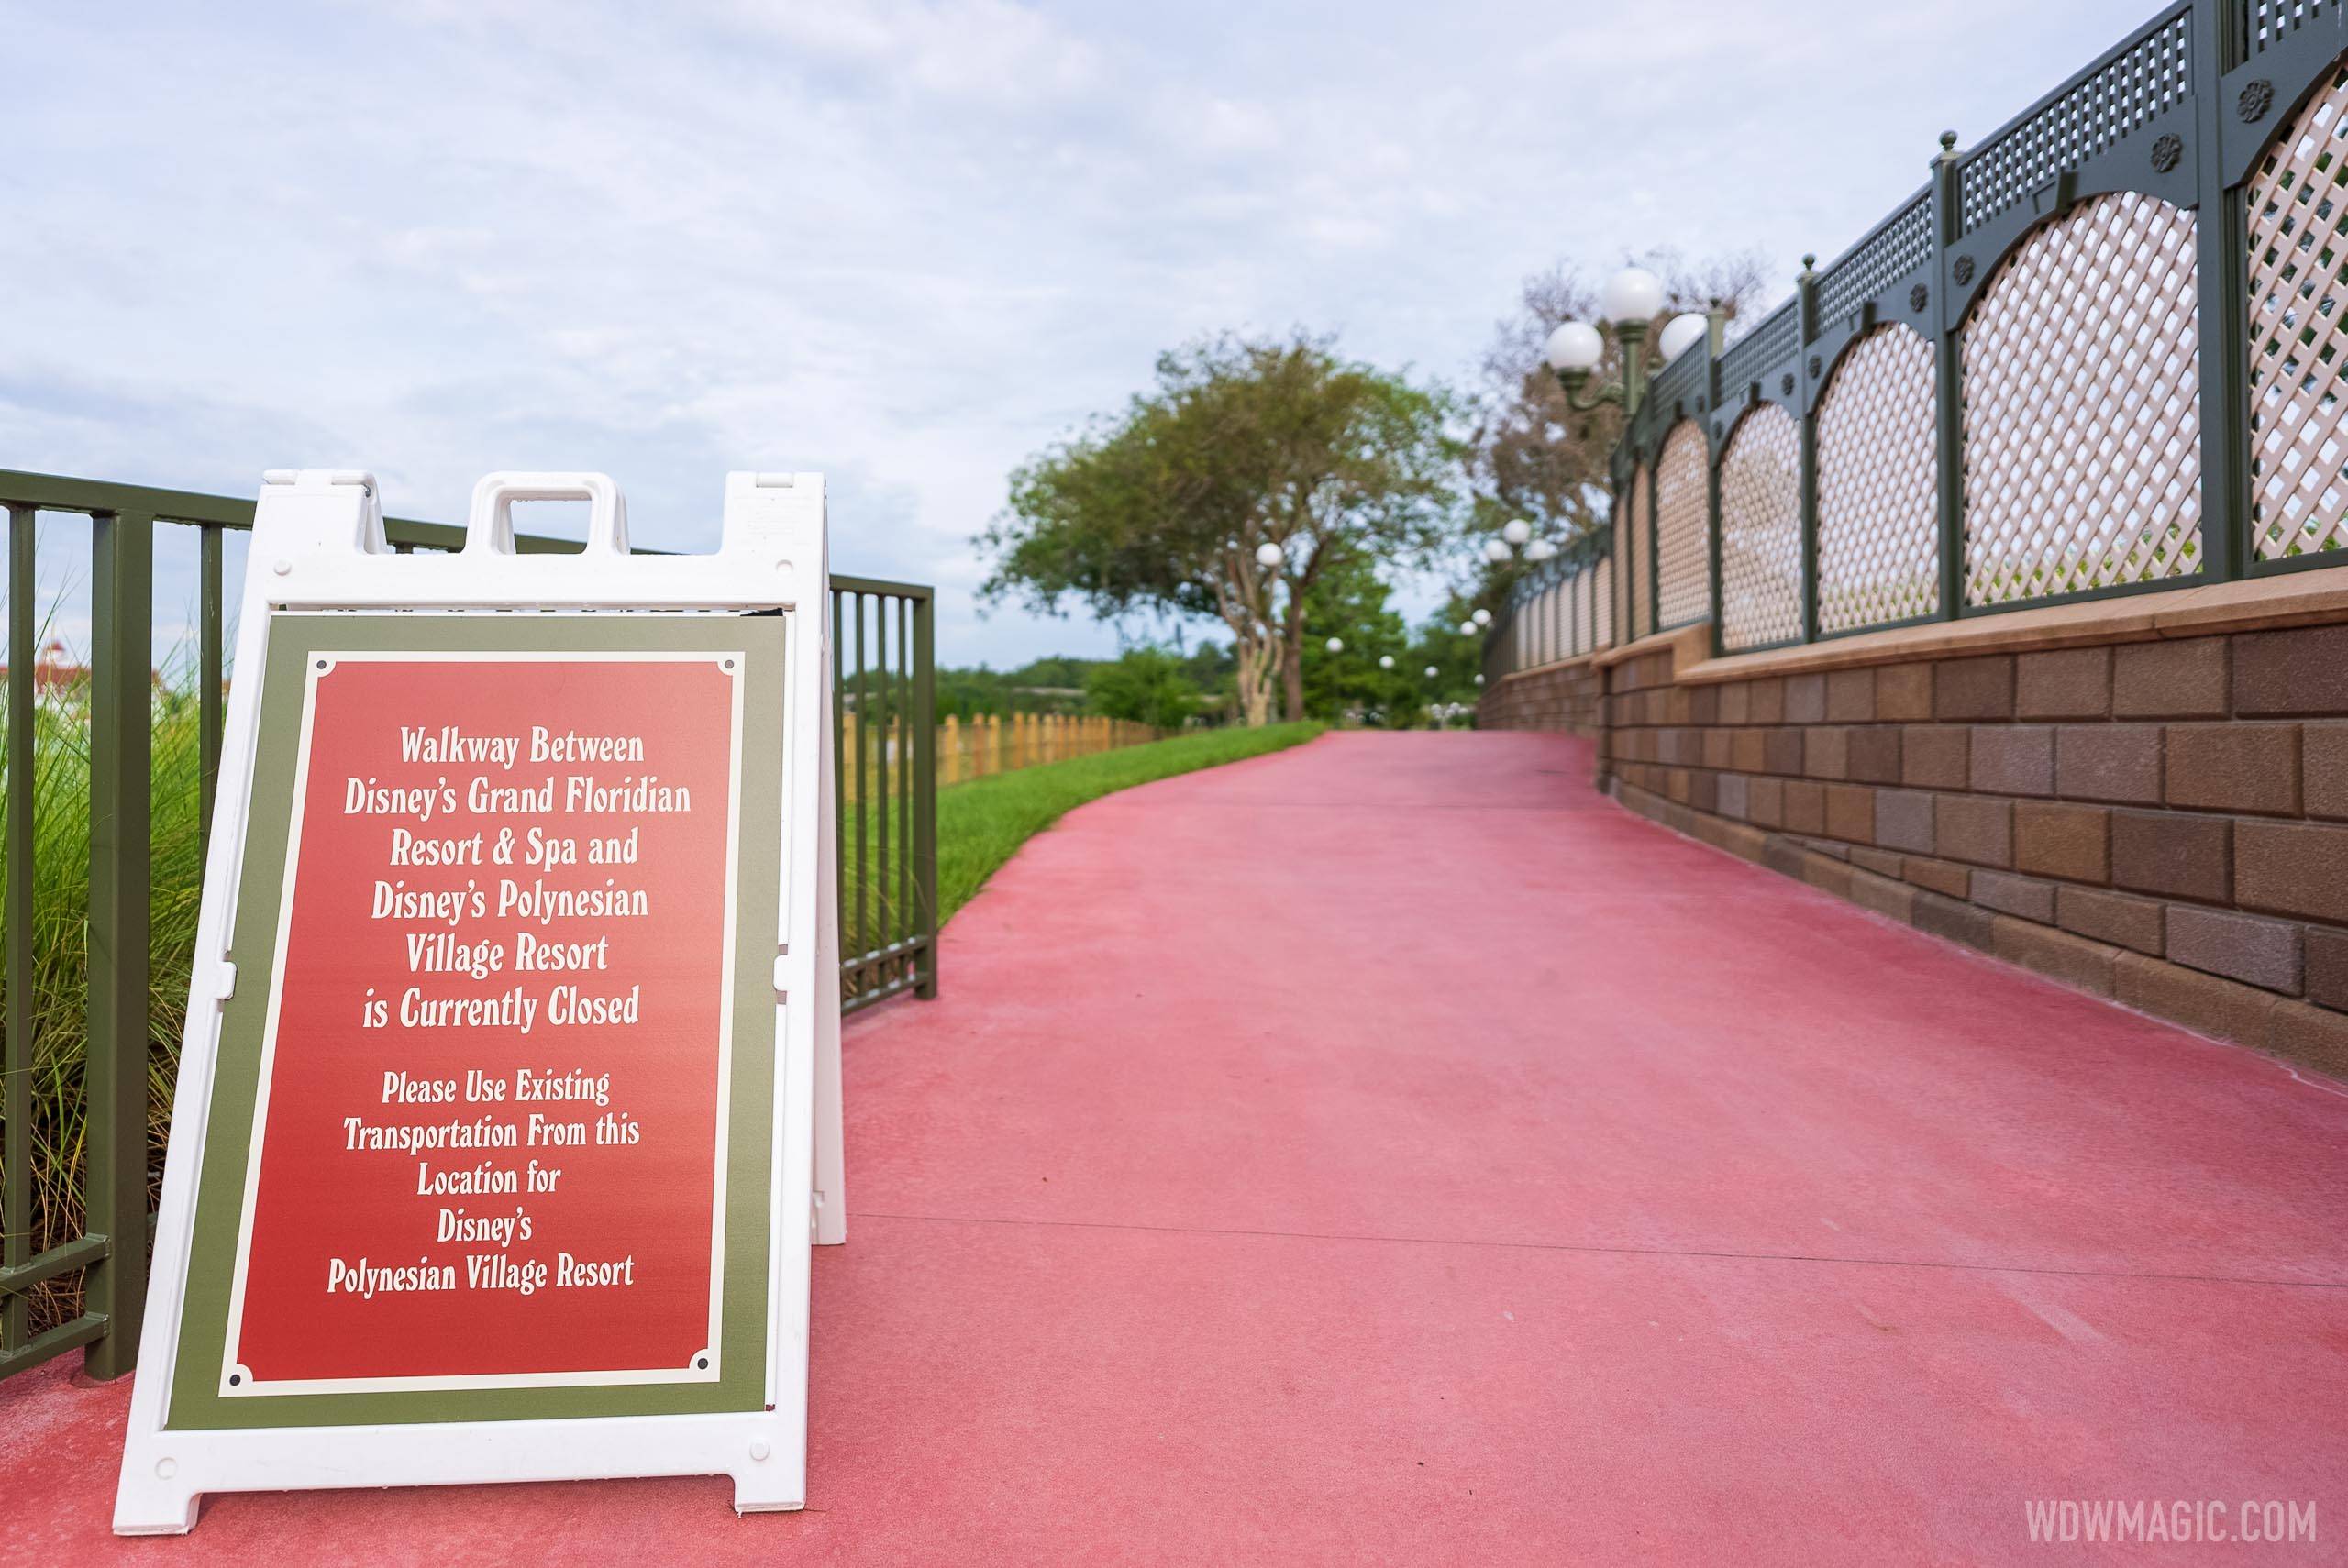 Walkway between Disney's Grand Floridian and Disney's Polynesian Resort currently closed